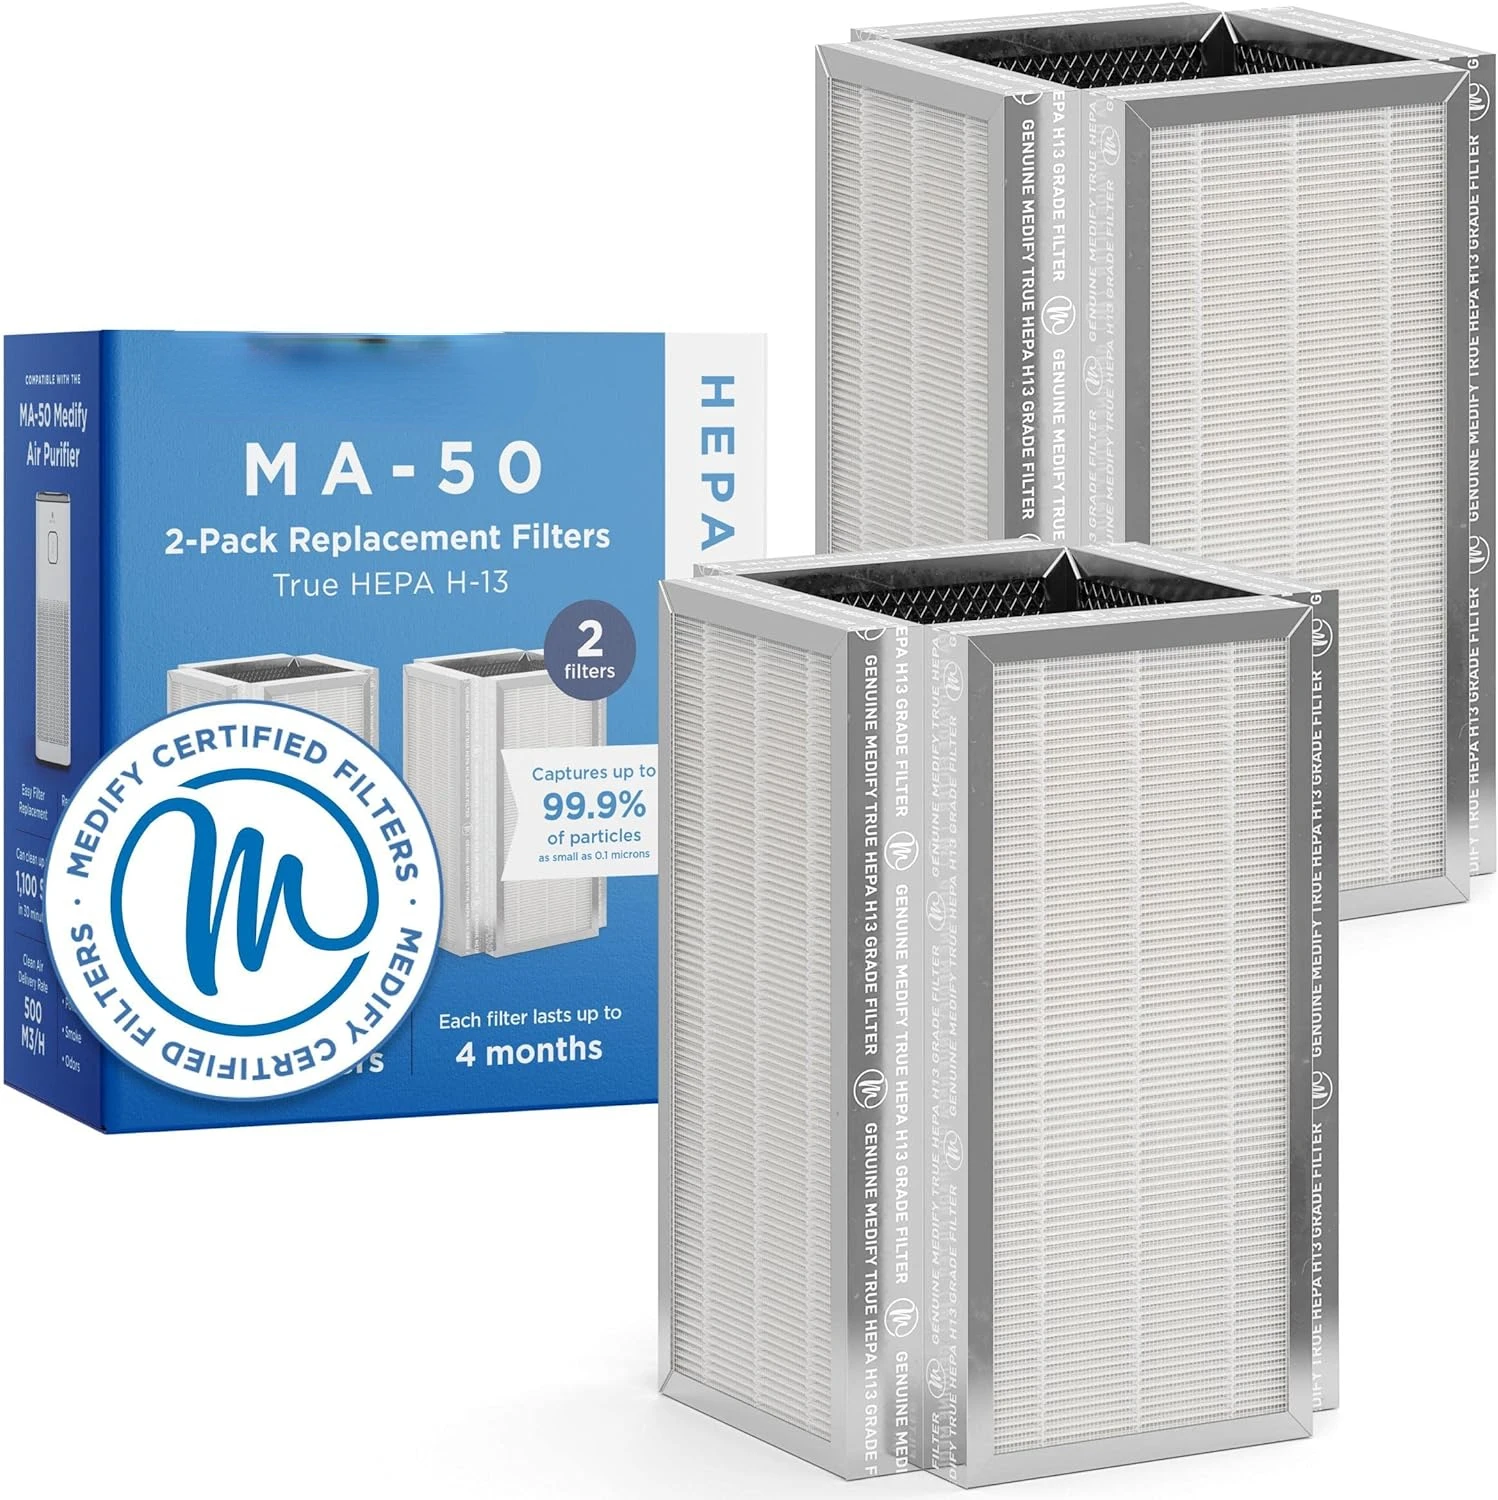 

Air MA-50 Genuine Replacement Filter | for Smoke, Smokers, Dust, Odors, Pet Dander | 3 in 1 with Pre-filter, H13 HEPA, and Activ